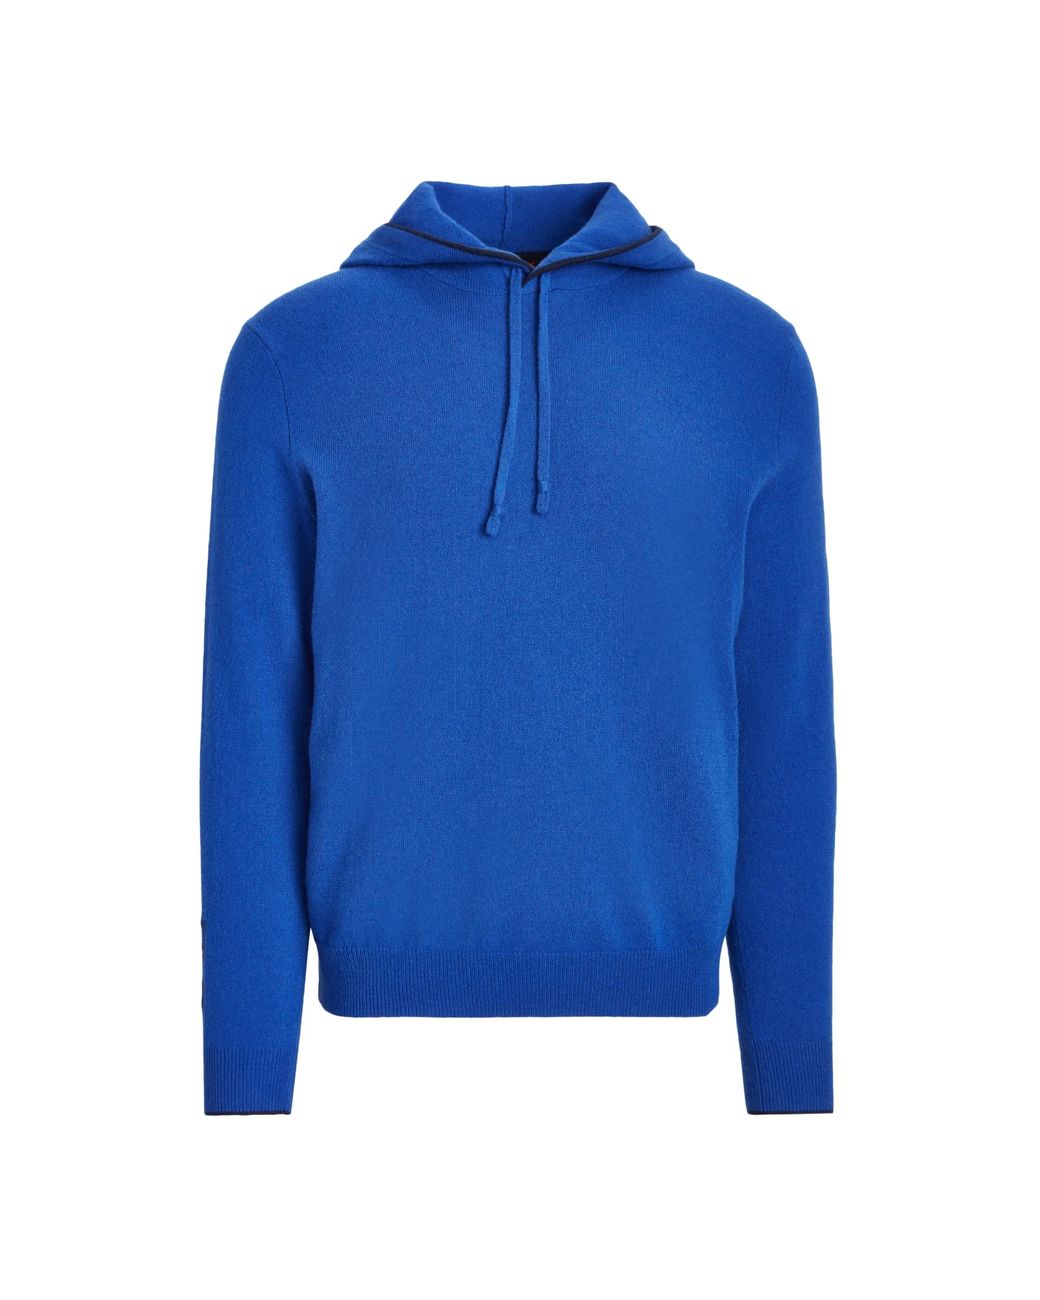 Ralph Lauren Washable Cashmere Hooded Sweater in Blue for Men - Lyst